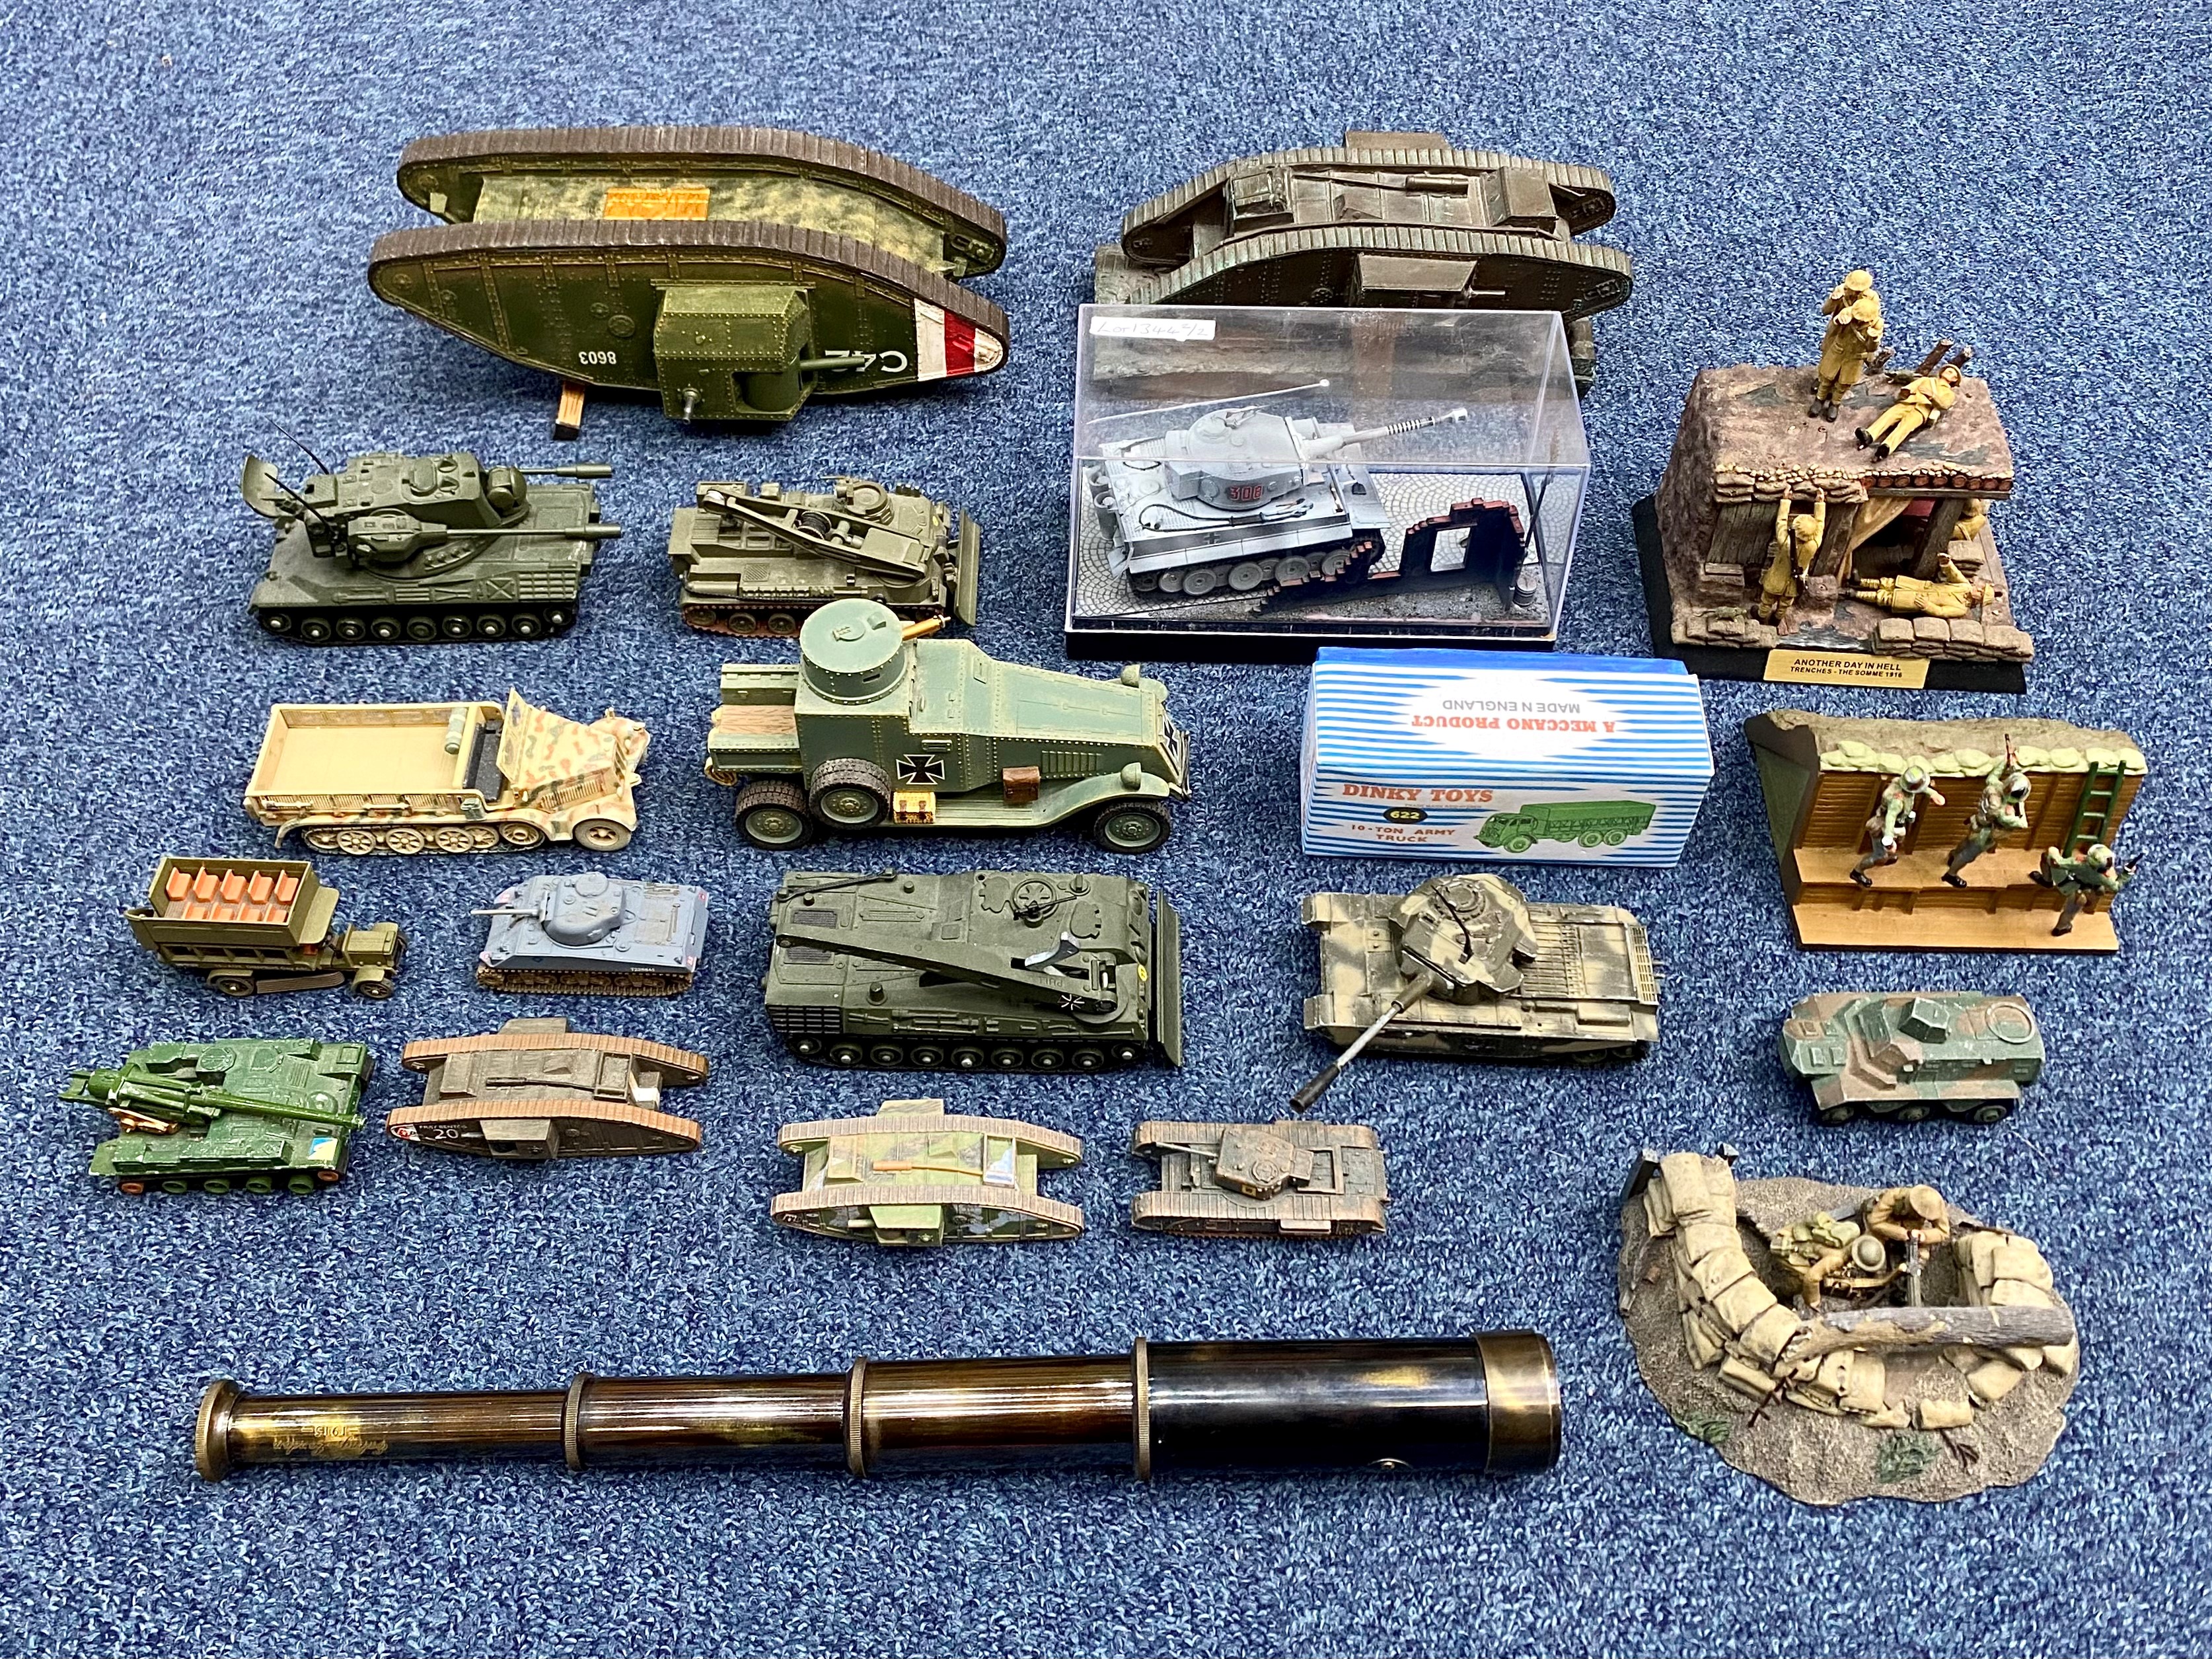 WWI Interest - Large Collection of Military Figures & Vehicles, including tanks, jeeps, trucks,